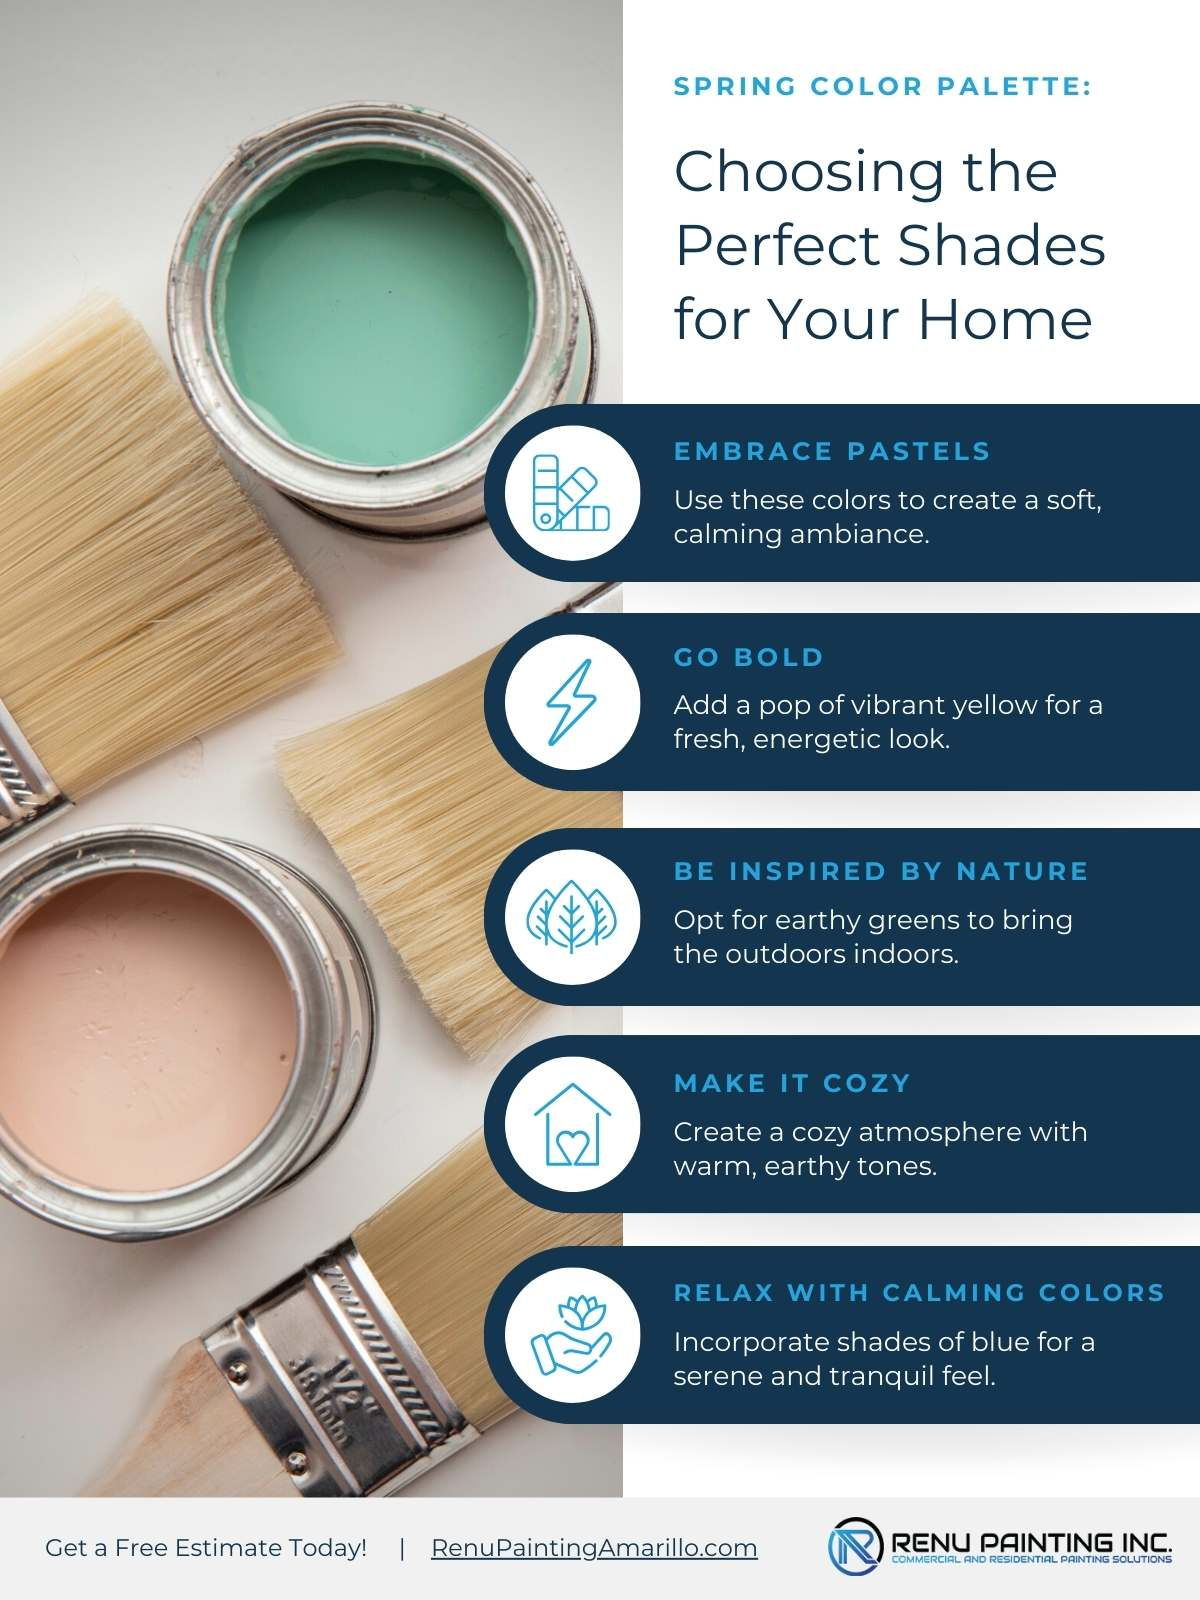 M24883 - Infographic - Spring Color Palette Choosing the Perfect Shades for Your Home.jpg